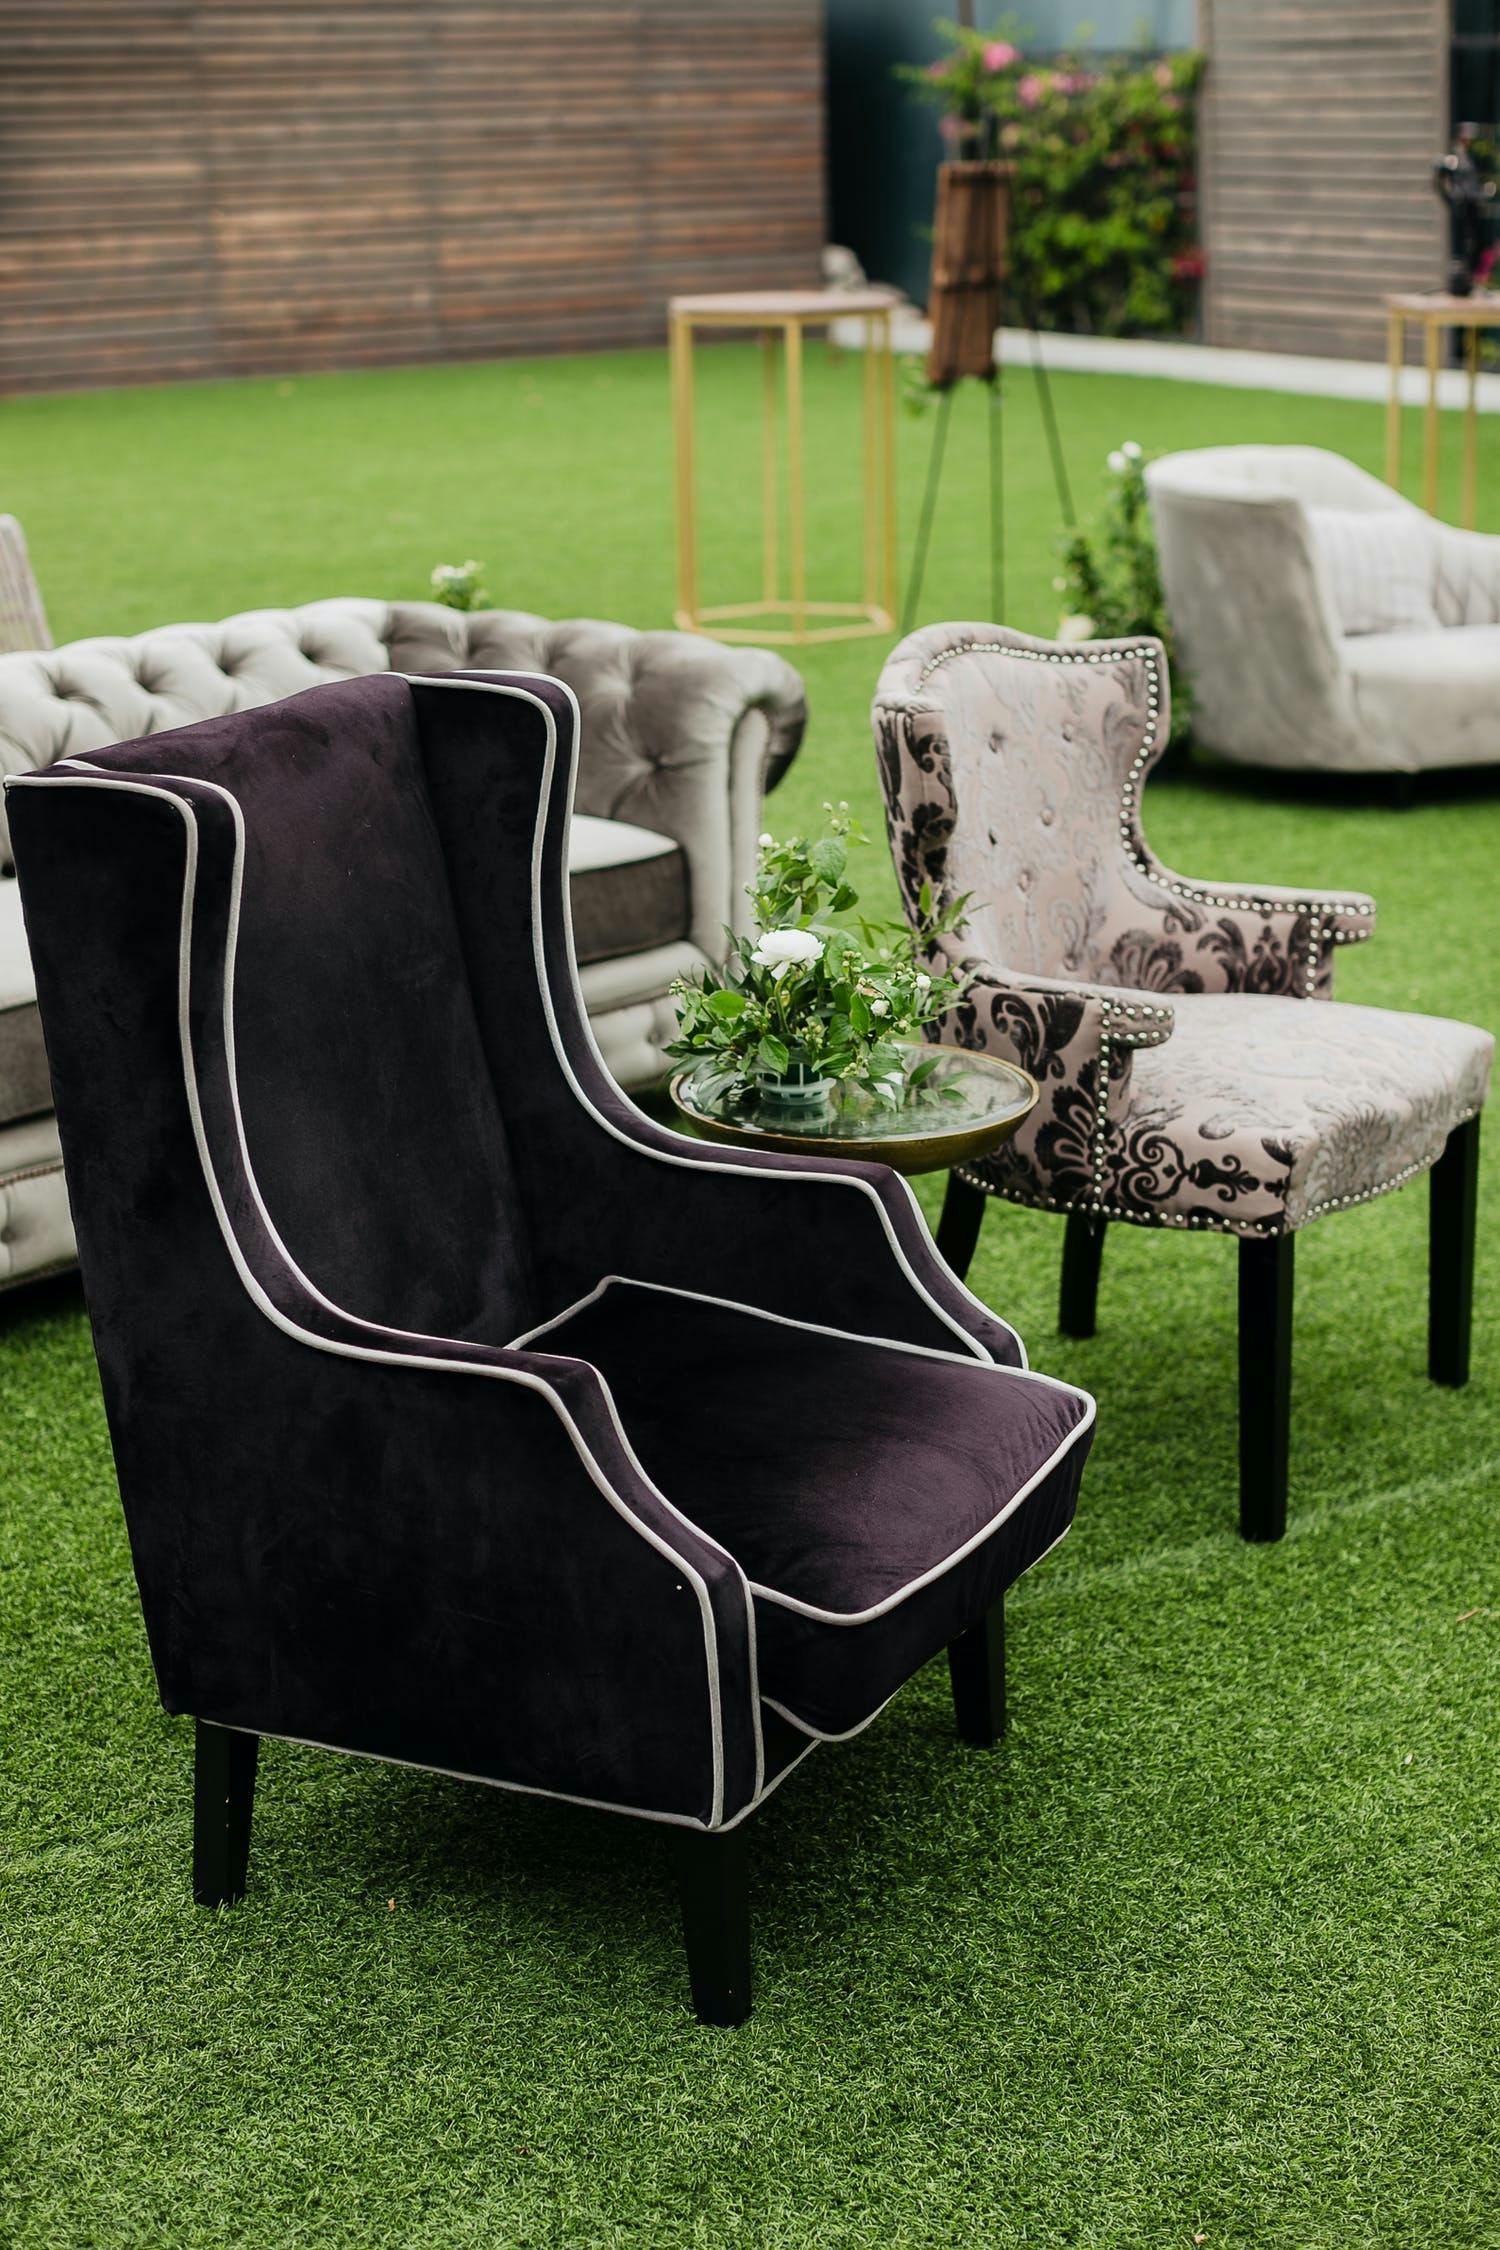 2021 trend outdoor furniture used for a wedding ceremony | PartySlate